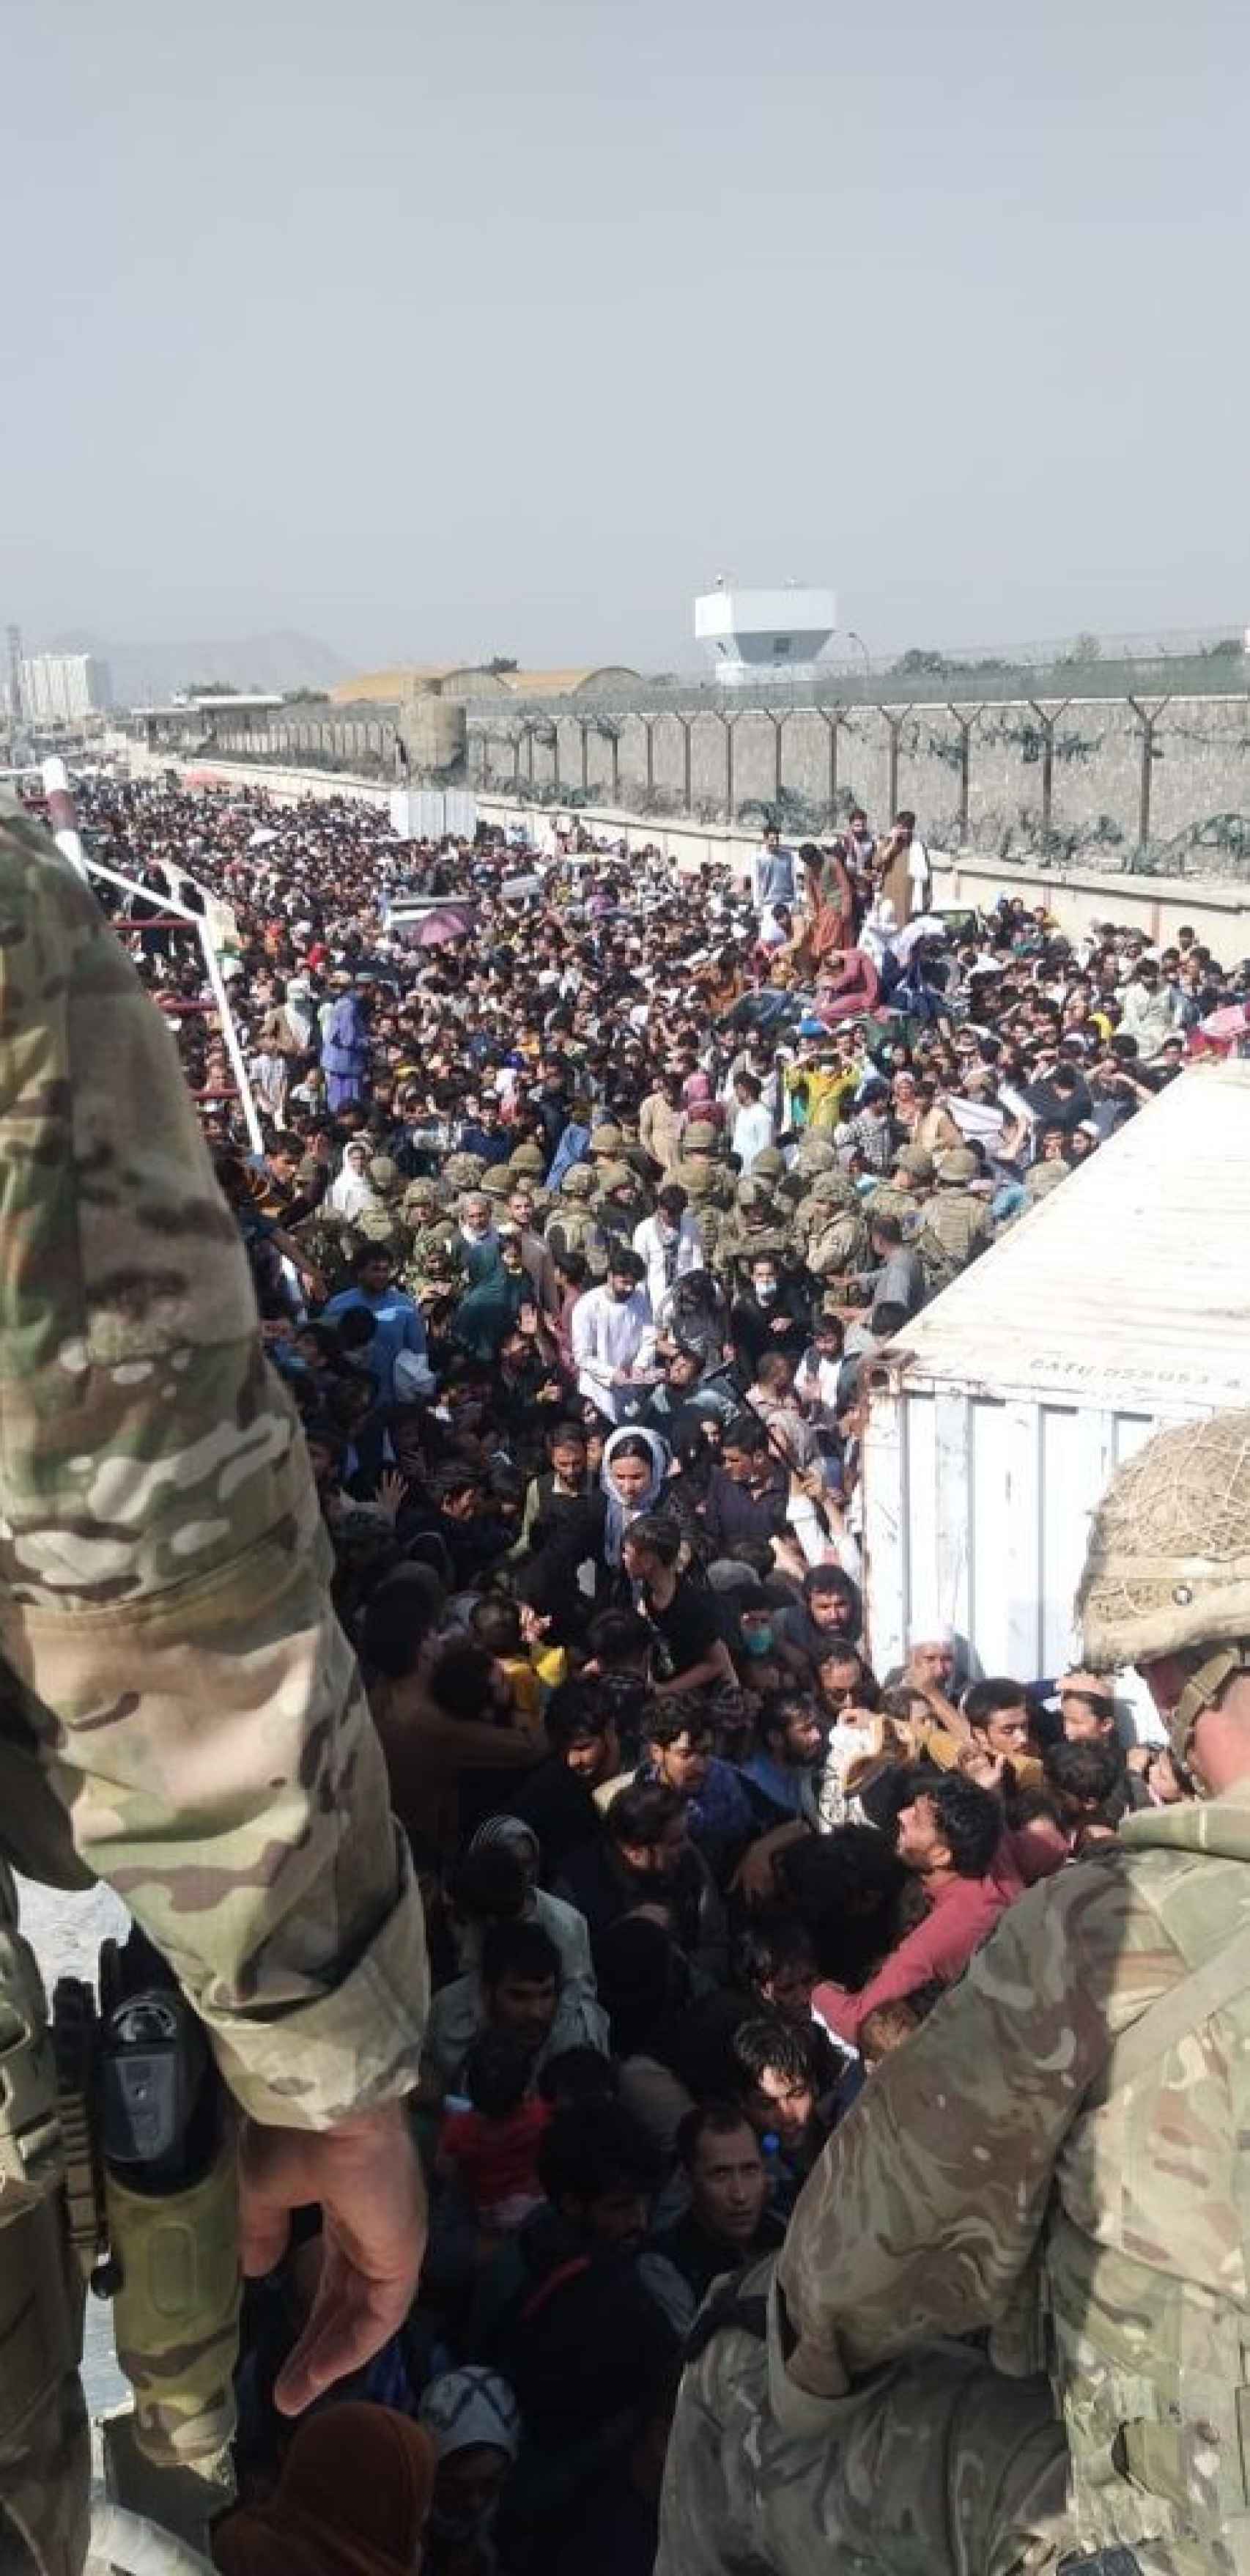 Kabul airport crowded with people trying to flee the country.